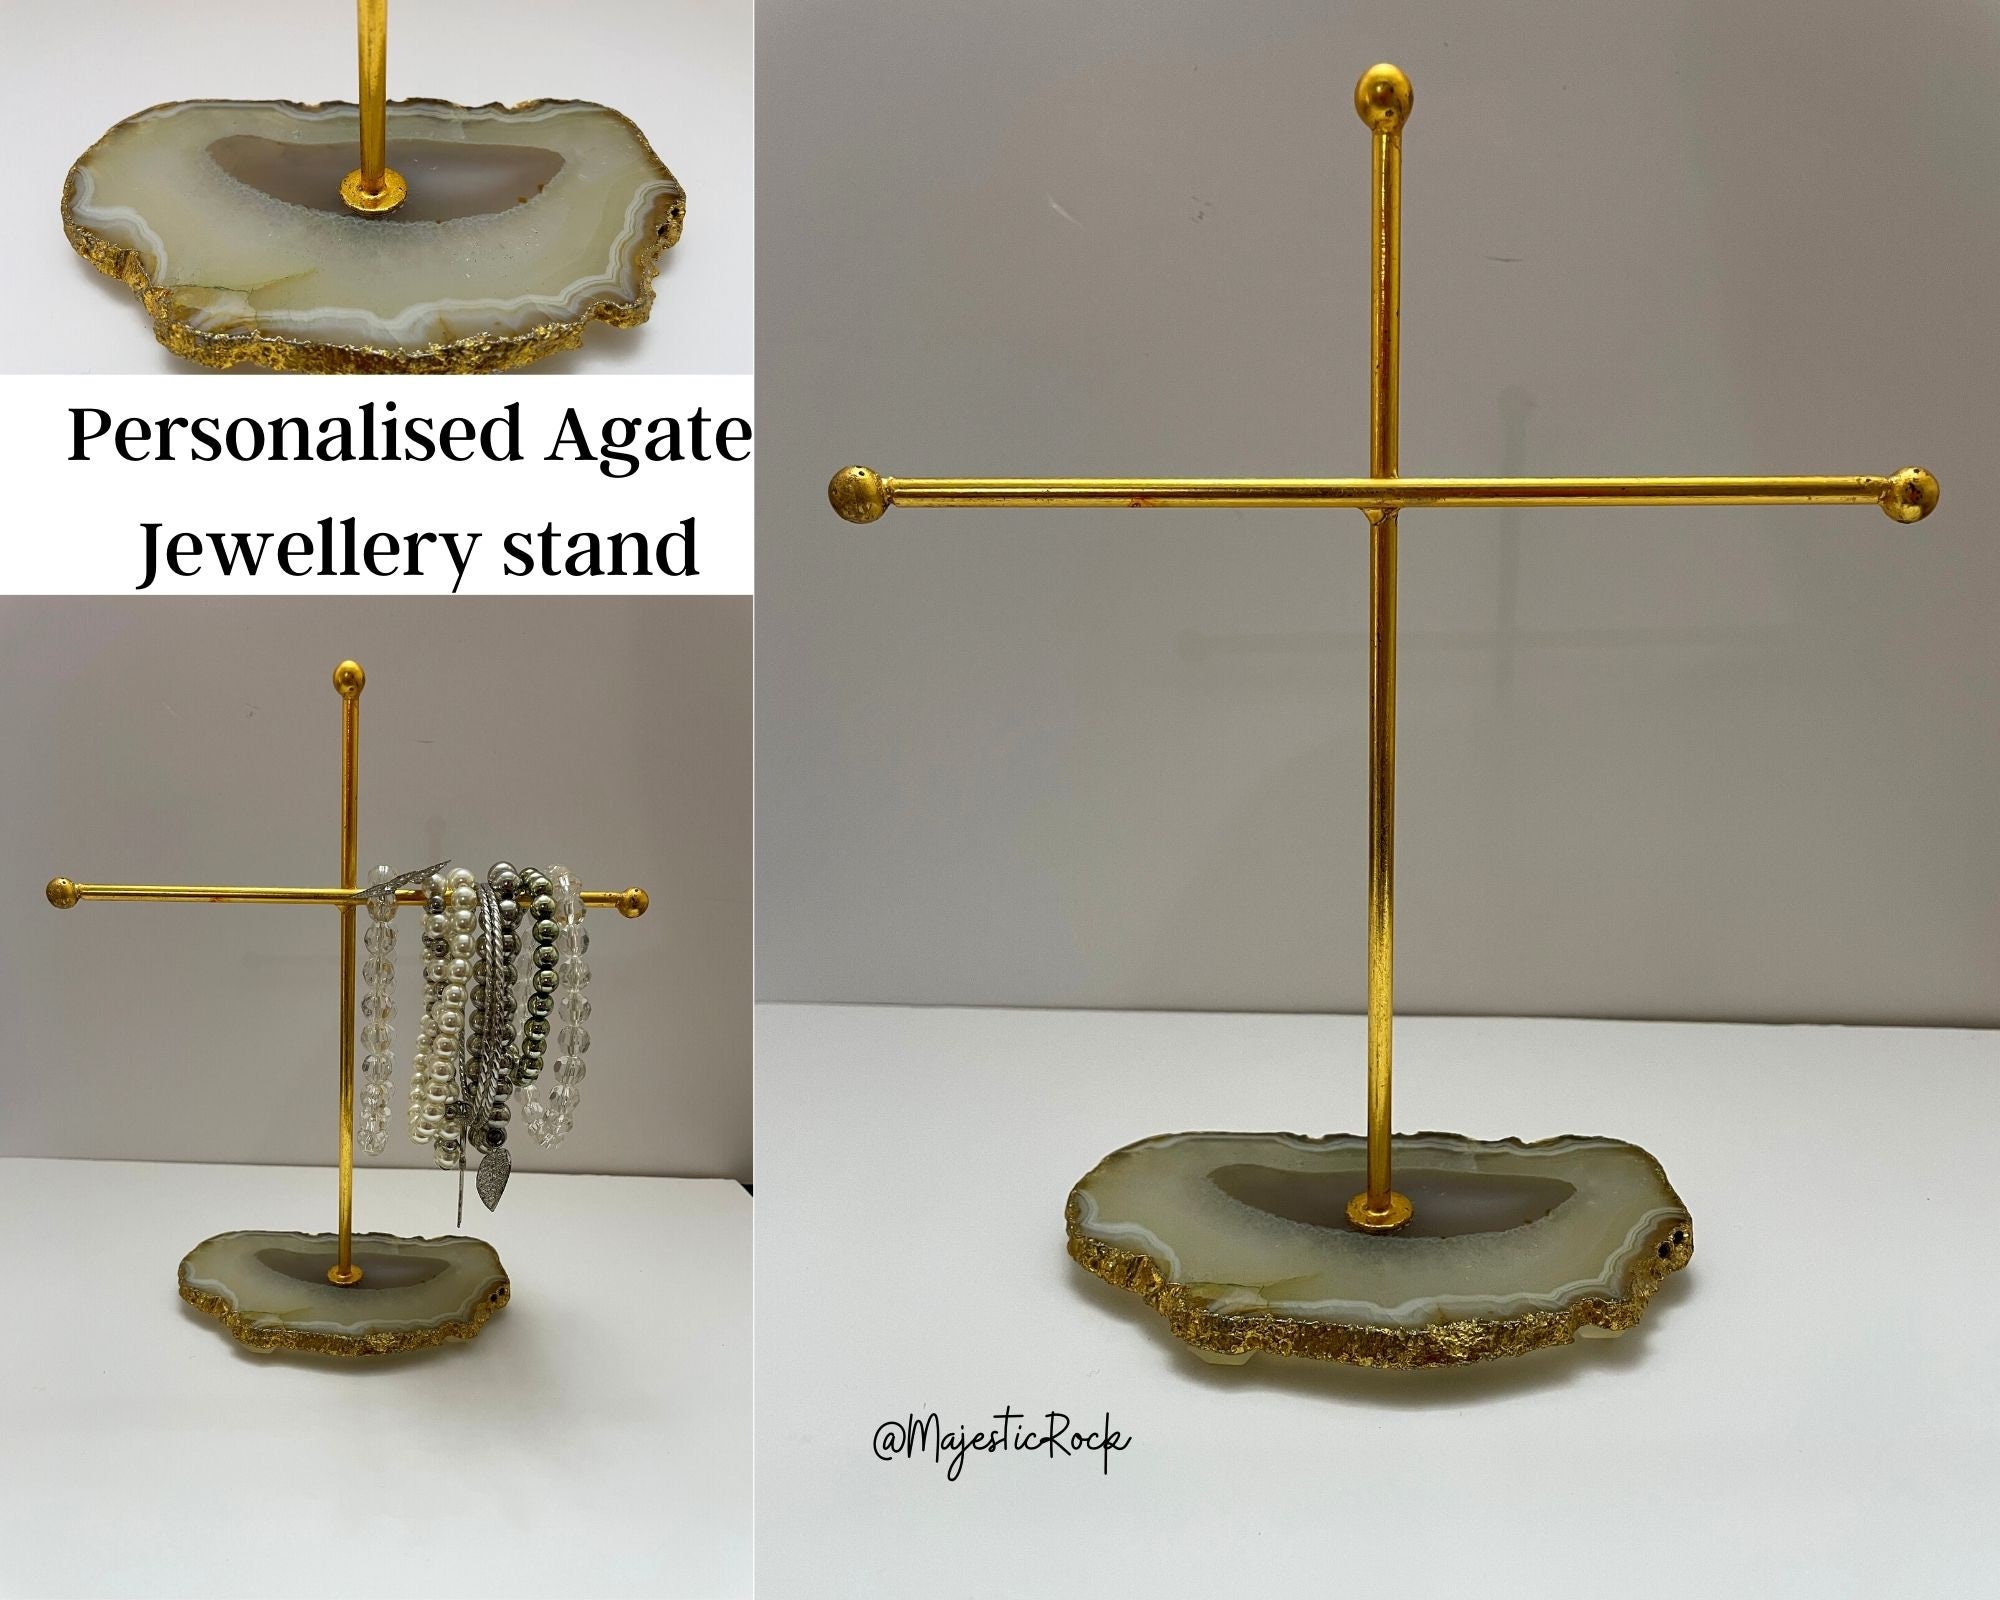 Pair Gold and Blue Plastic Picture Stands / Crowns / Menu Stands / Displays  